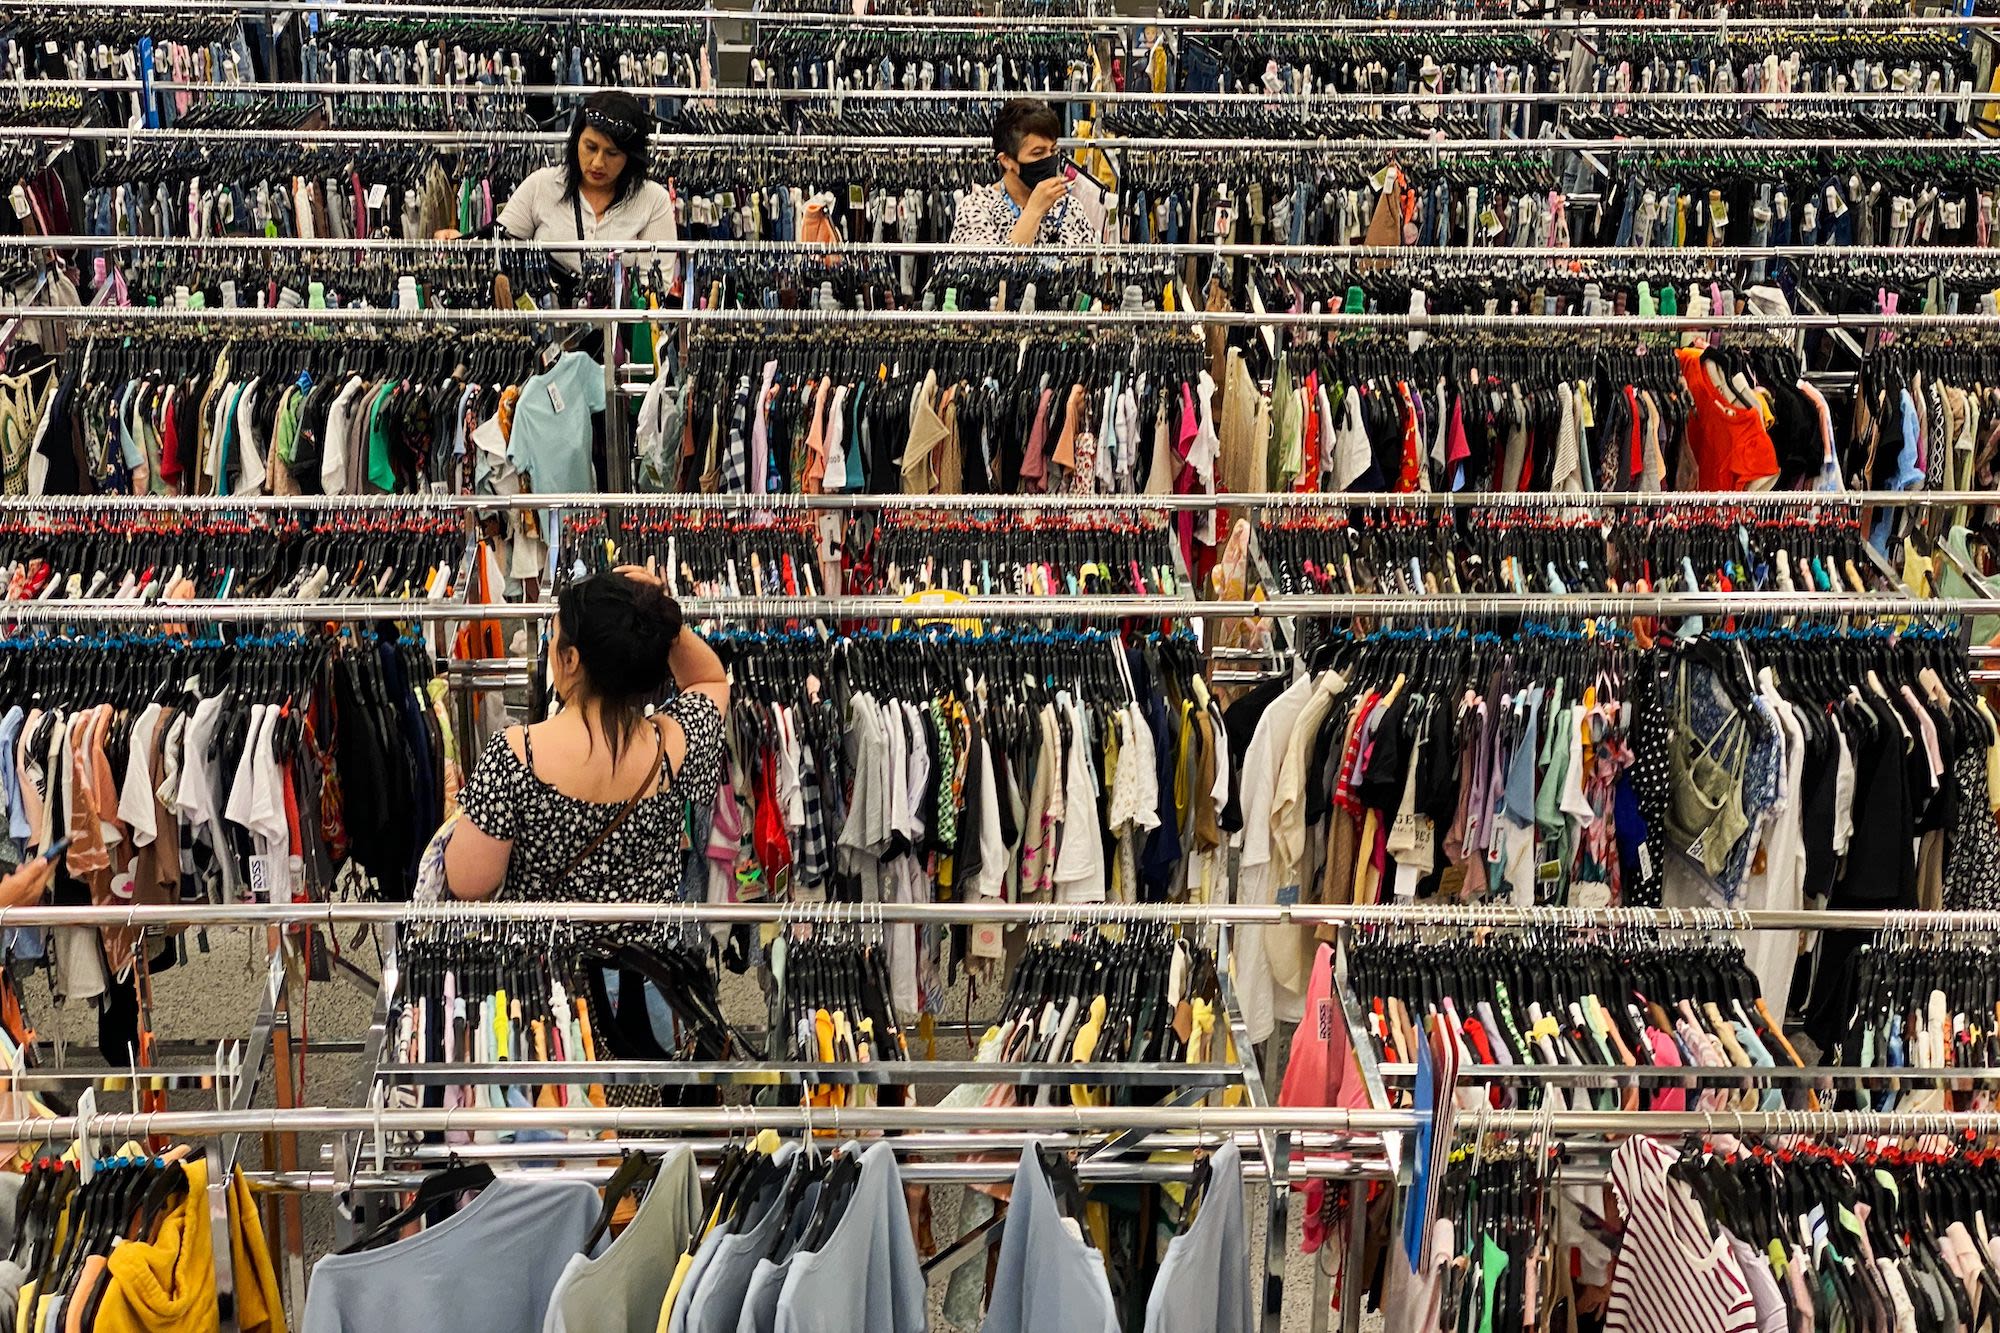 Online Clothing Shopping Increasing Comes With No-Return Policies - WSJ